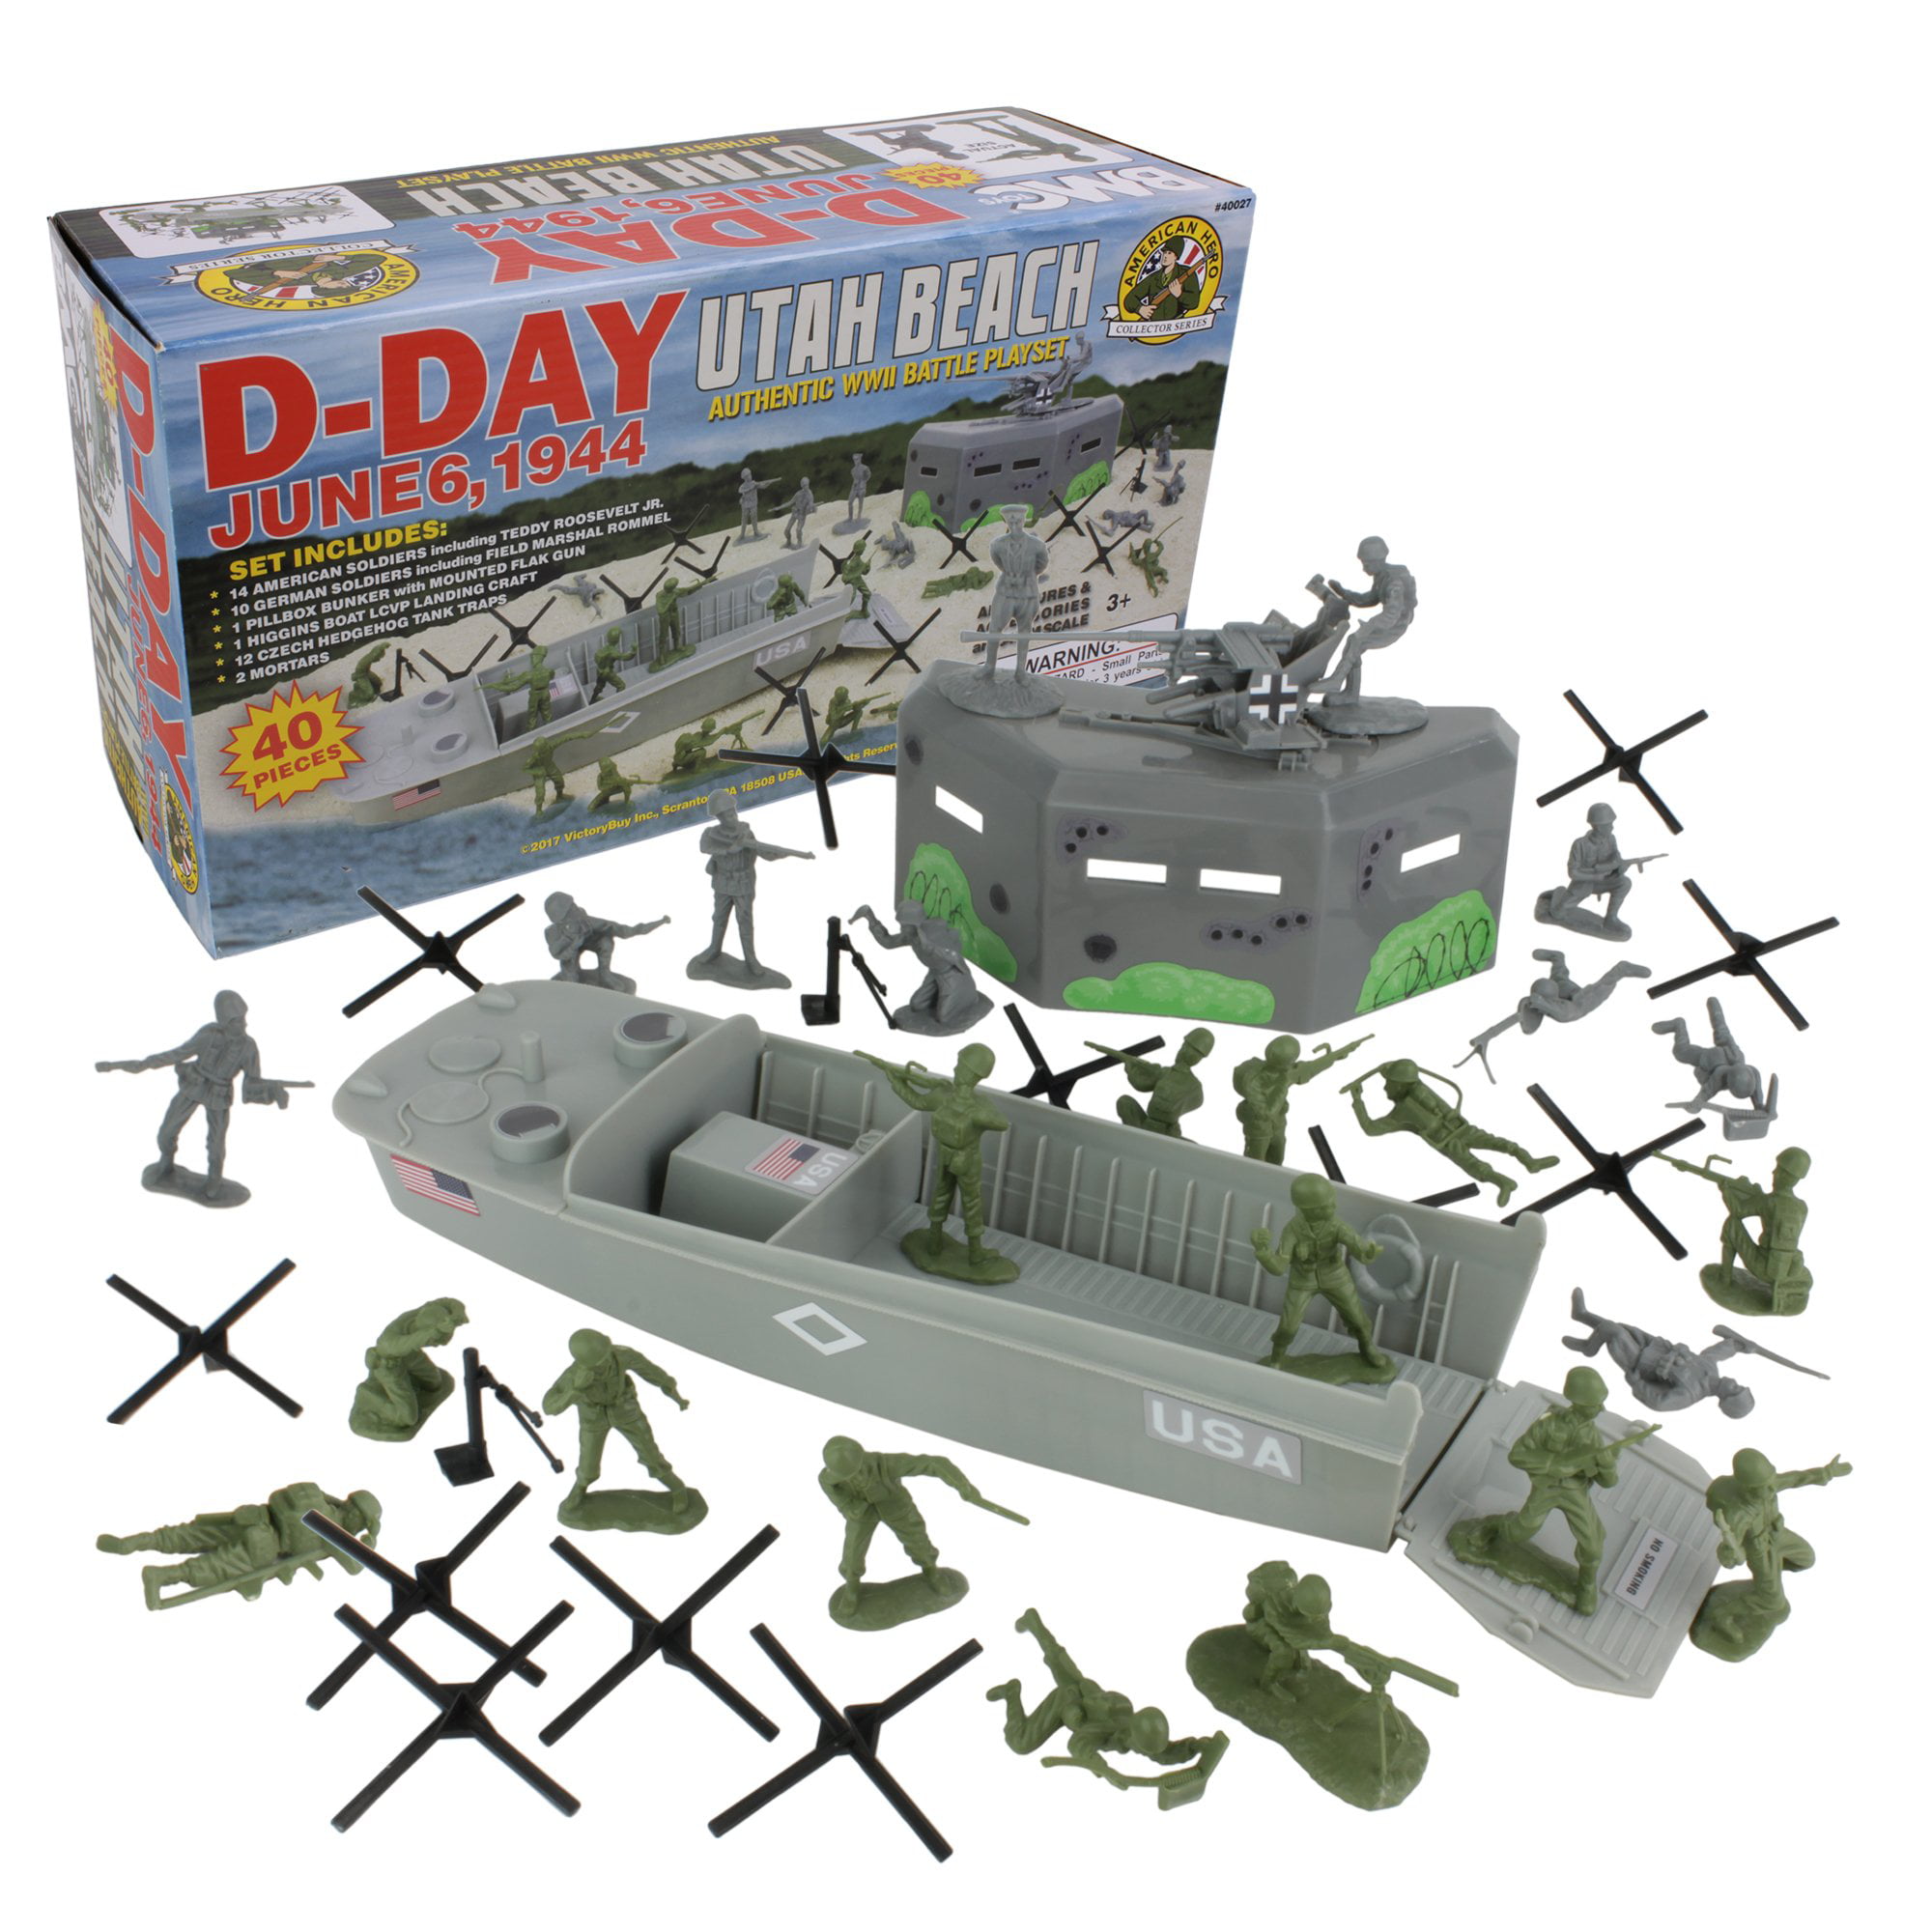 2 pcs Military Battleship Warship Models Toy Soldier Army Men Accessories 